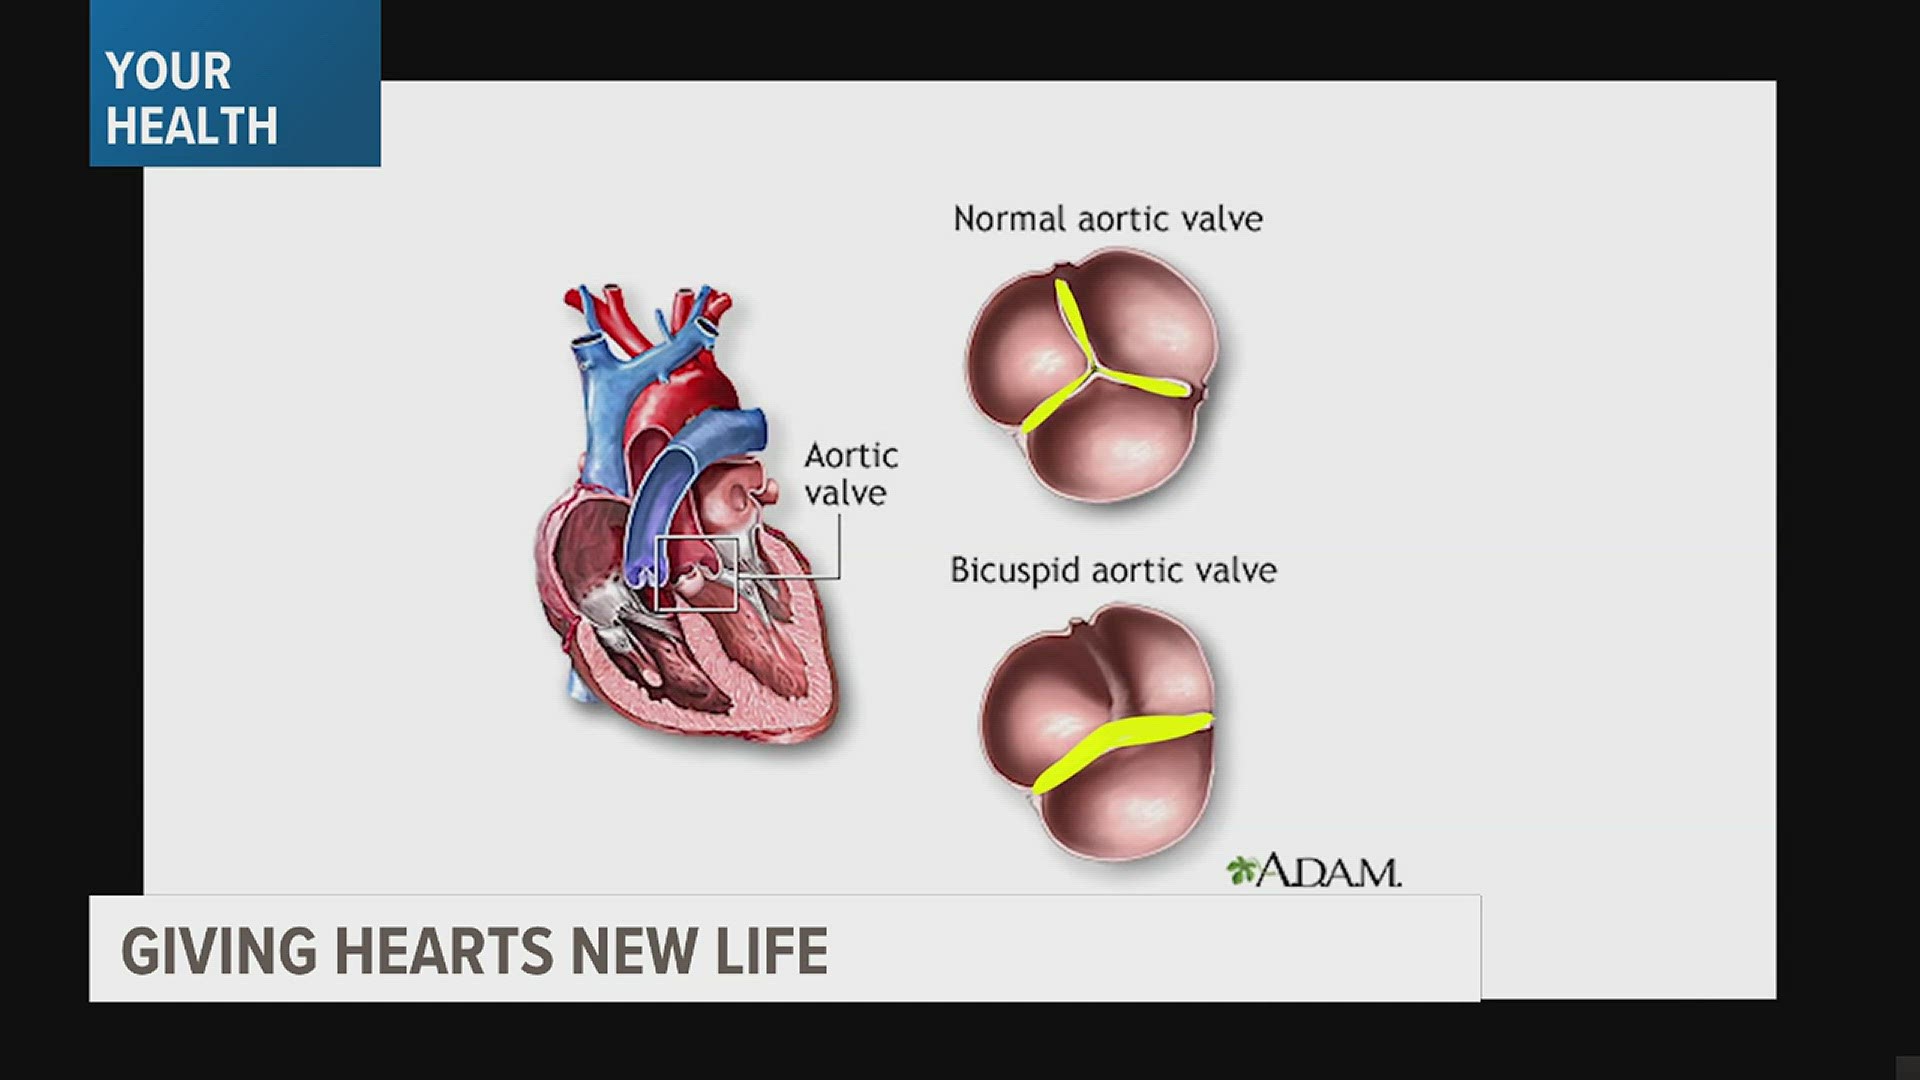 Heart defects in babies are decreasing, however adults with heart defects are rising. One surgeon shares his work in aortic valve replacements.